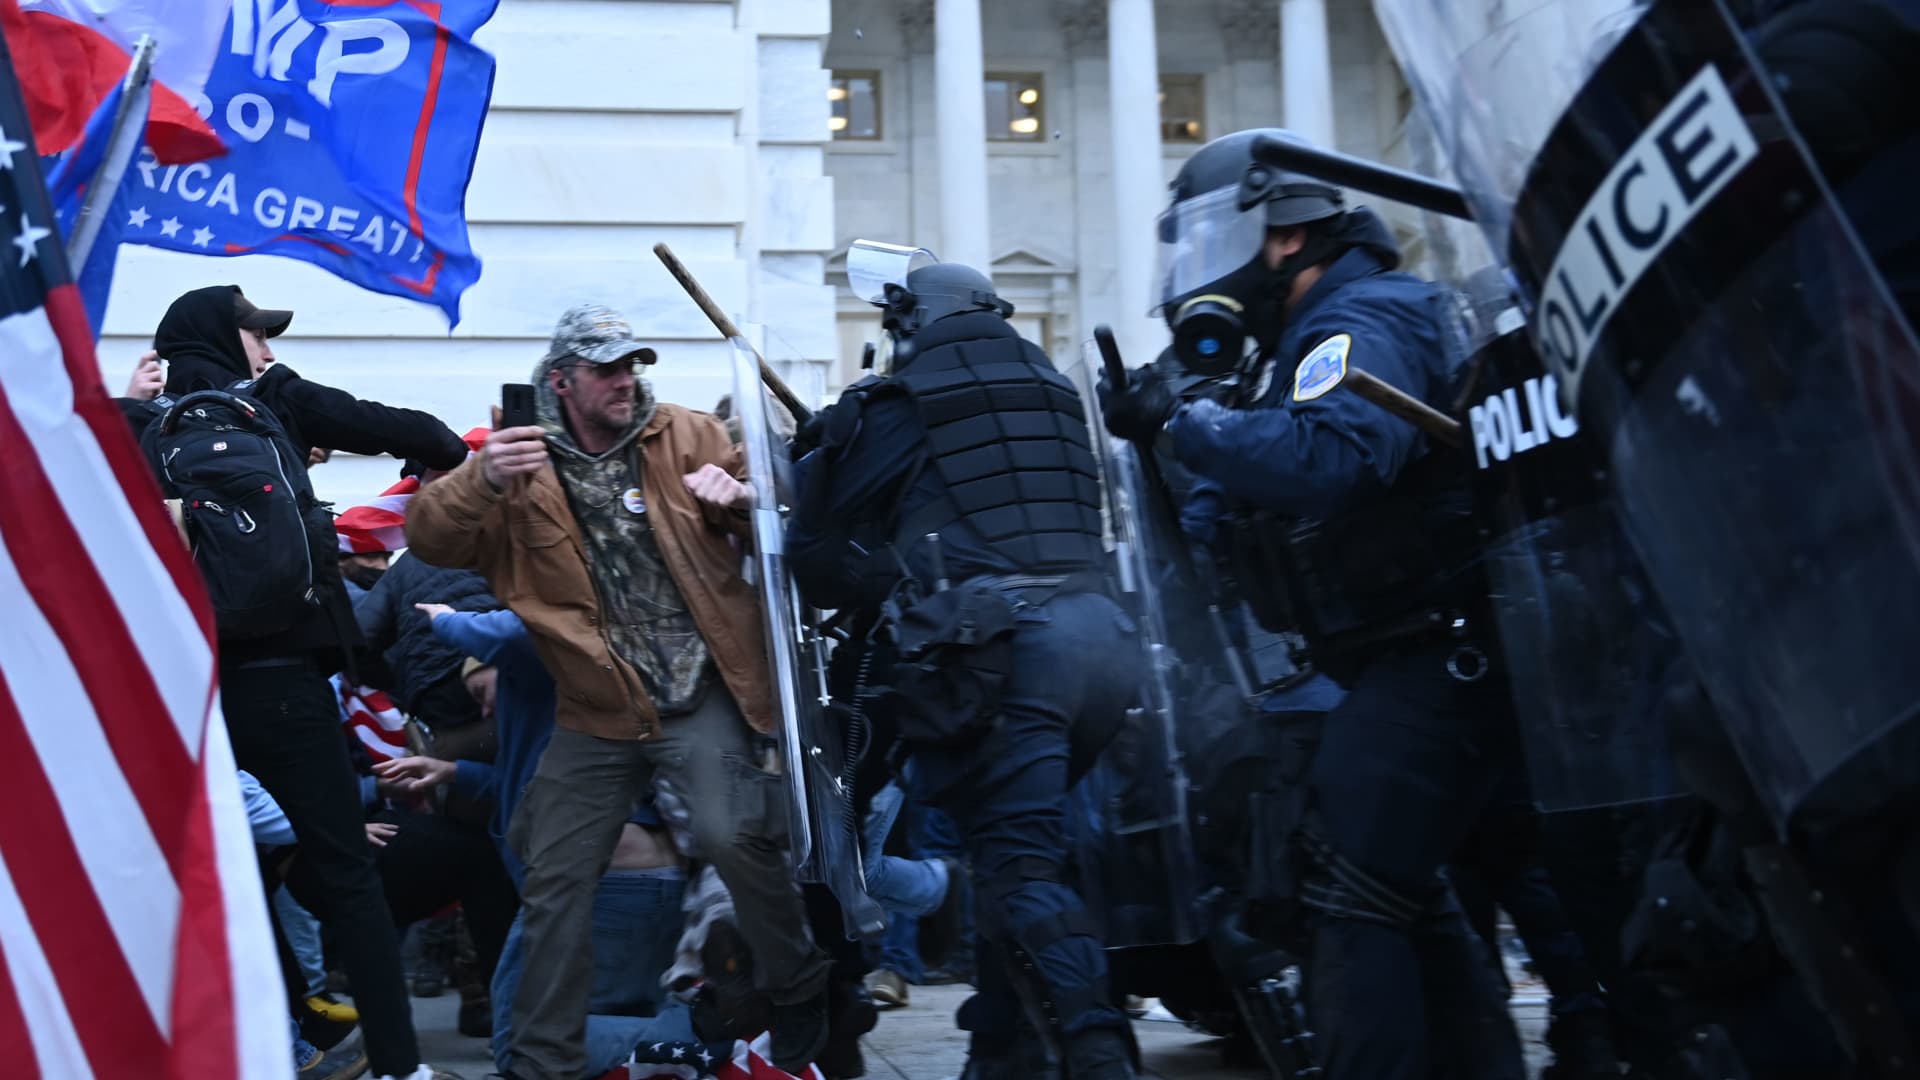 Trump supporters clash with police and security forces, as they storm the US Capitol in Washington, DC, on January 6, 2021.